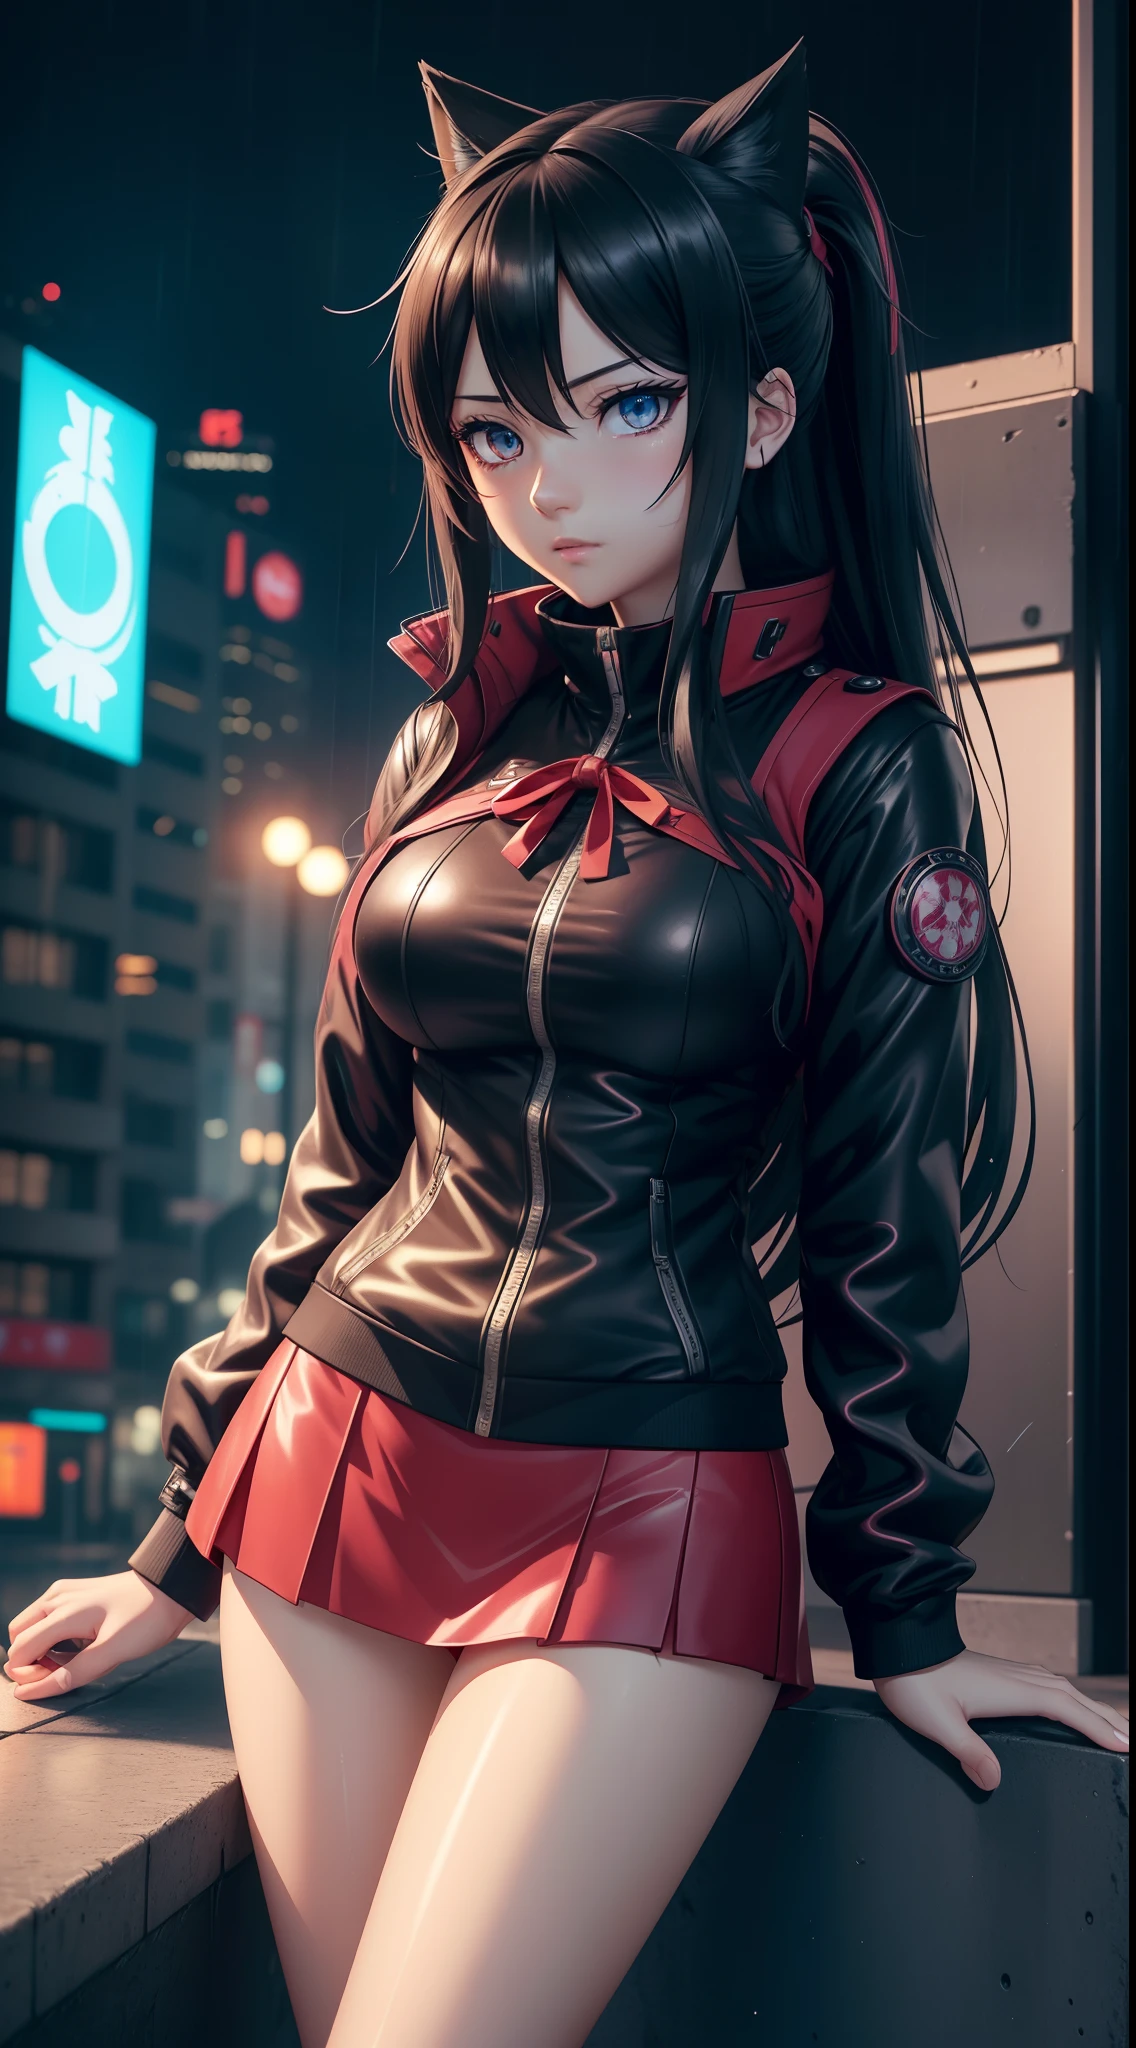 Photorealistic,Realistic illustration in Manga style,((Masterpiece)),((Best quality)),((Ultra detailed)),((1girl)),((only)),((waifu:1.5)), Perfect anatomy,Cute_face,Exceptionally Beauty Waifu Ahri as Nezuko Kamado as Rin Tohsaka Fate/Stay night,wet clothes,miniskirt,black socks,light-red_eyes,wavy hair,eyeliner,cute makeup ,((Perfect Detailed Eyes)),Cyberpunk City,rainy outside,night,((Extremely CG Unity 8K Wallpaper)),Intricate Detailing,Extremely beautiful and aesthetic,Octane Rendering,Full Body Portrait,damp skin,( (Perfect Detailed Body)),